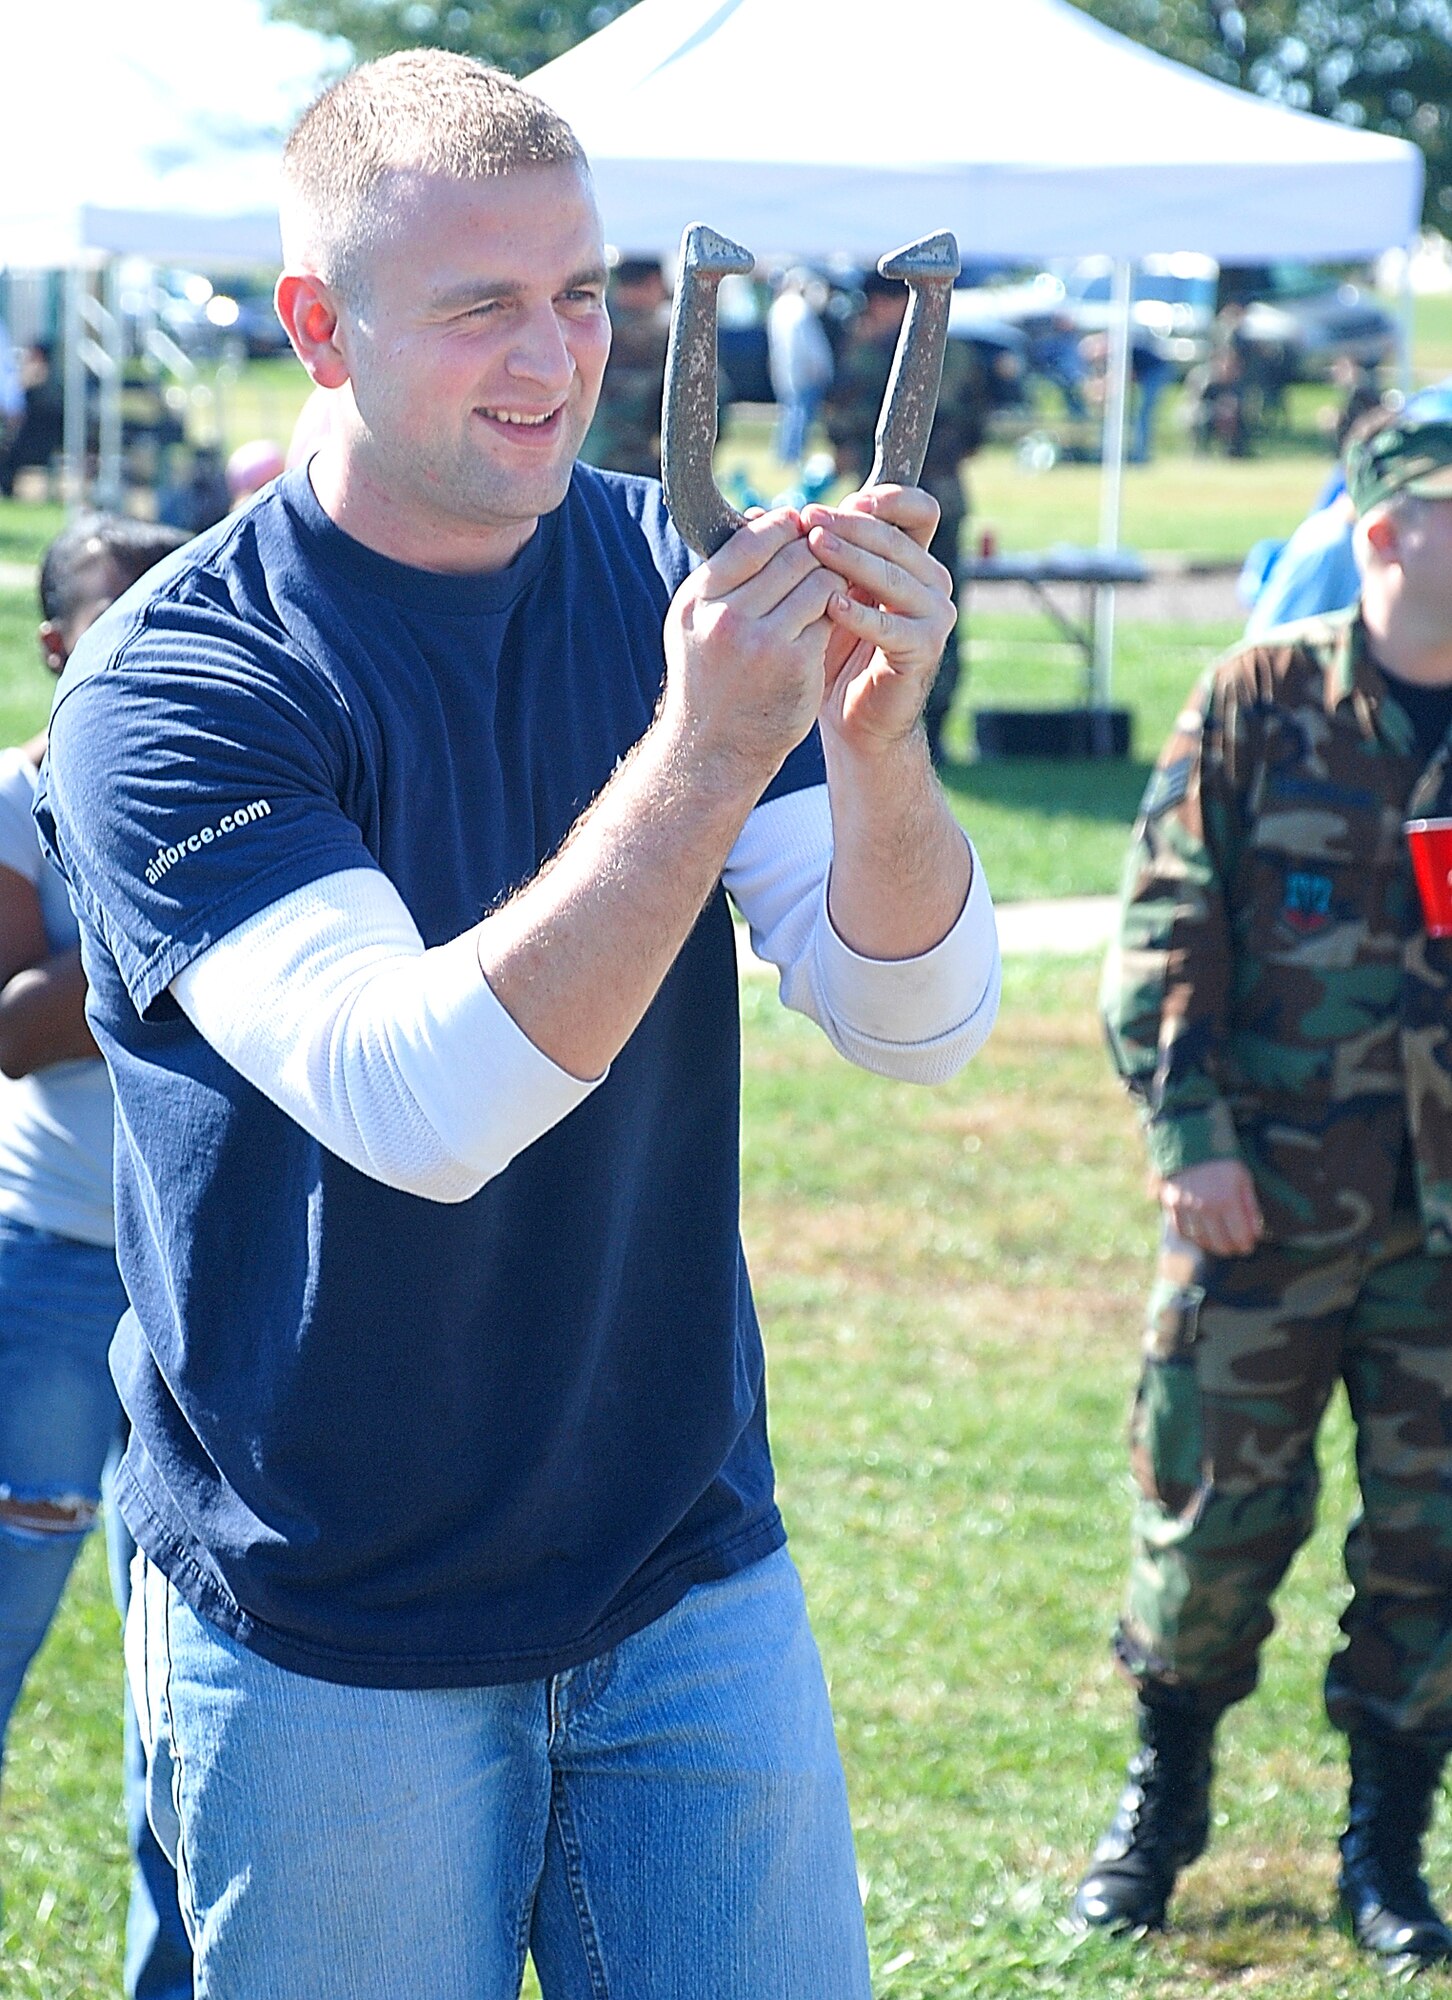 Senior Airman Andrew Carrender, 442nd  Logistics Readiness Squadron, takes careful aim as he prepares to throw a horseshoe at the 442nd Family Appreciation Day Oct. 14, 2007. Airman Carrender is an Air Force reservist assigned to the 442nd Fighter Wing at Whiteman AFB, Mo. (US Air Force photo/Staff Sgt. Tom Talbert)